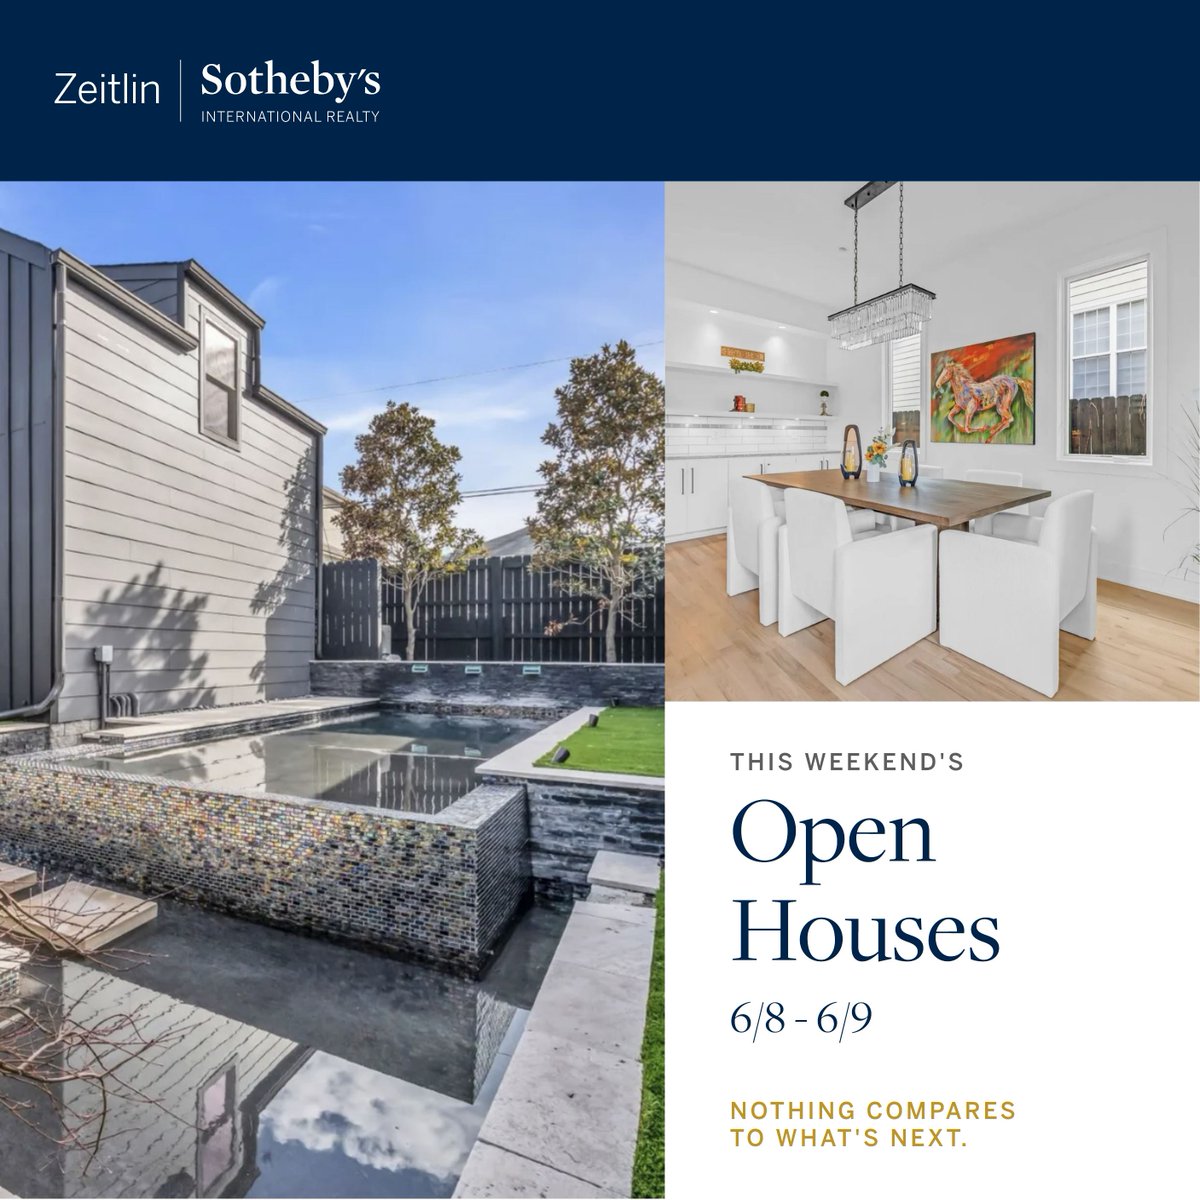 From Nashville to Franklin, Brentwood, and beyond, it's the perfect time to discover your next home.

buff.ly/37yG9lY

#zeitlinsir #zsir #tennessee #sothebysrealty #realestate #luxury #curbappeal #luxuryrealestate #design #home #homedesign #architecture #luxurylifestyle